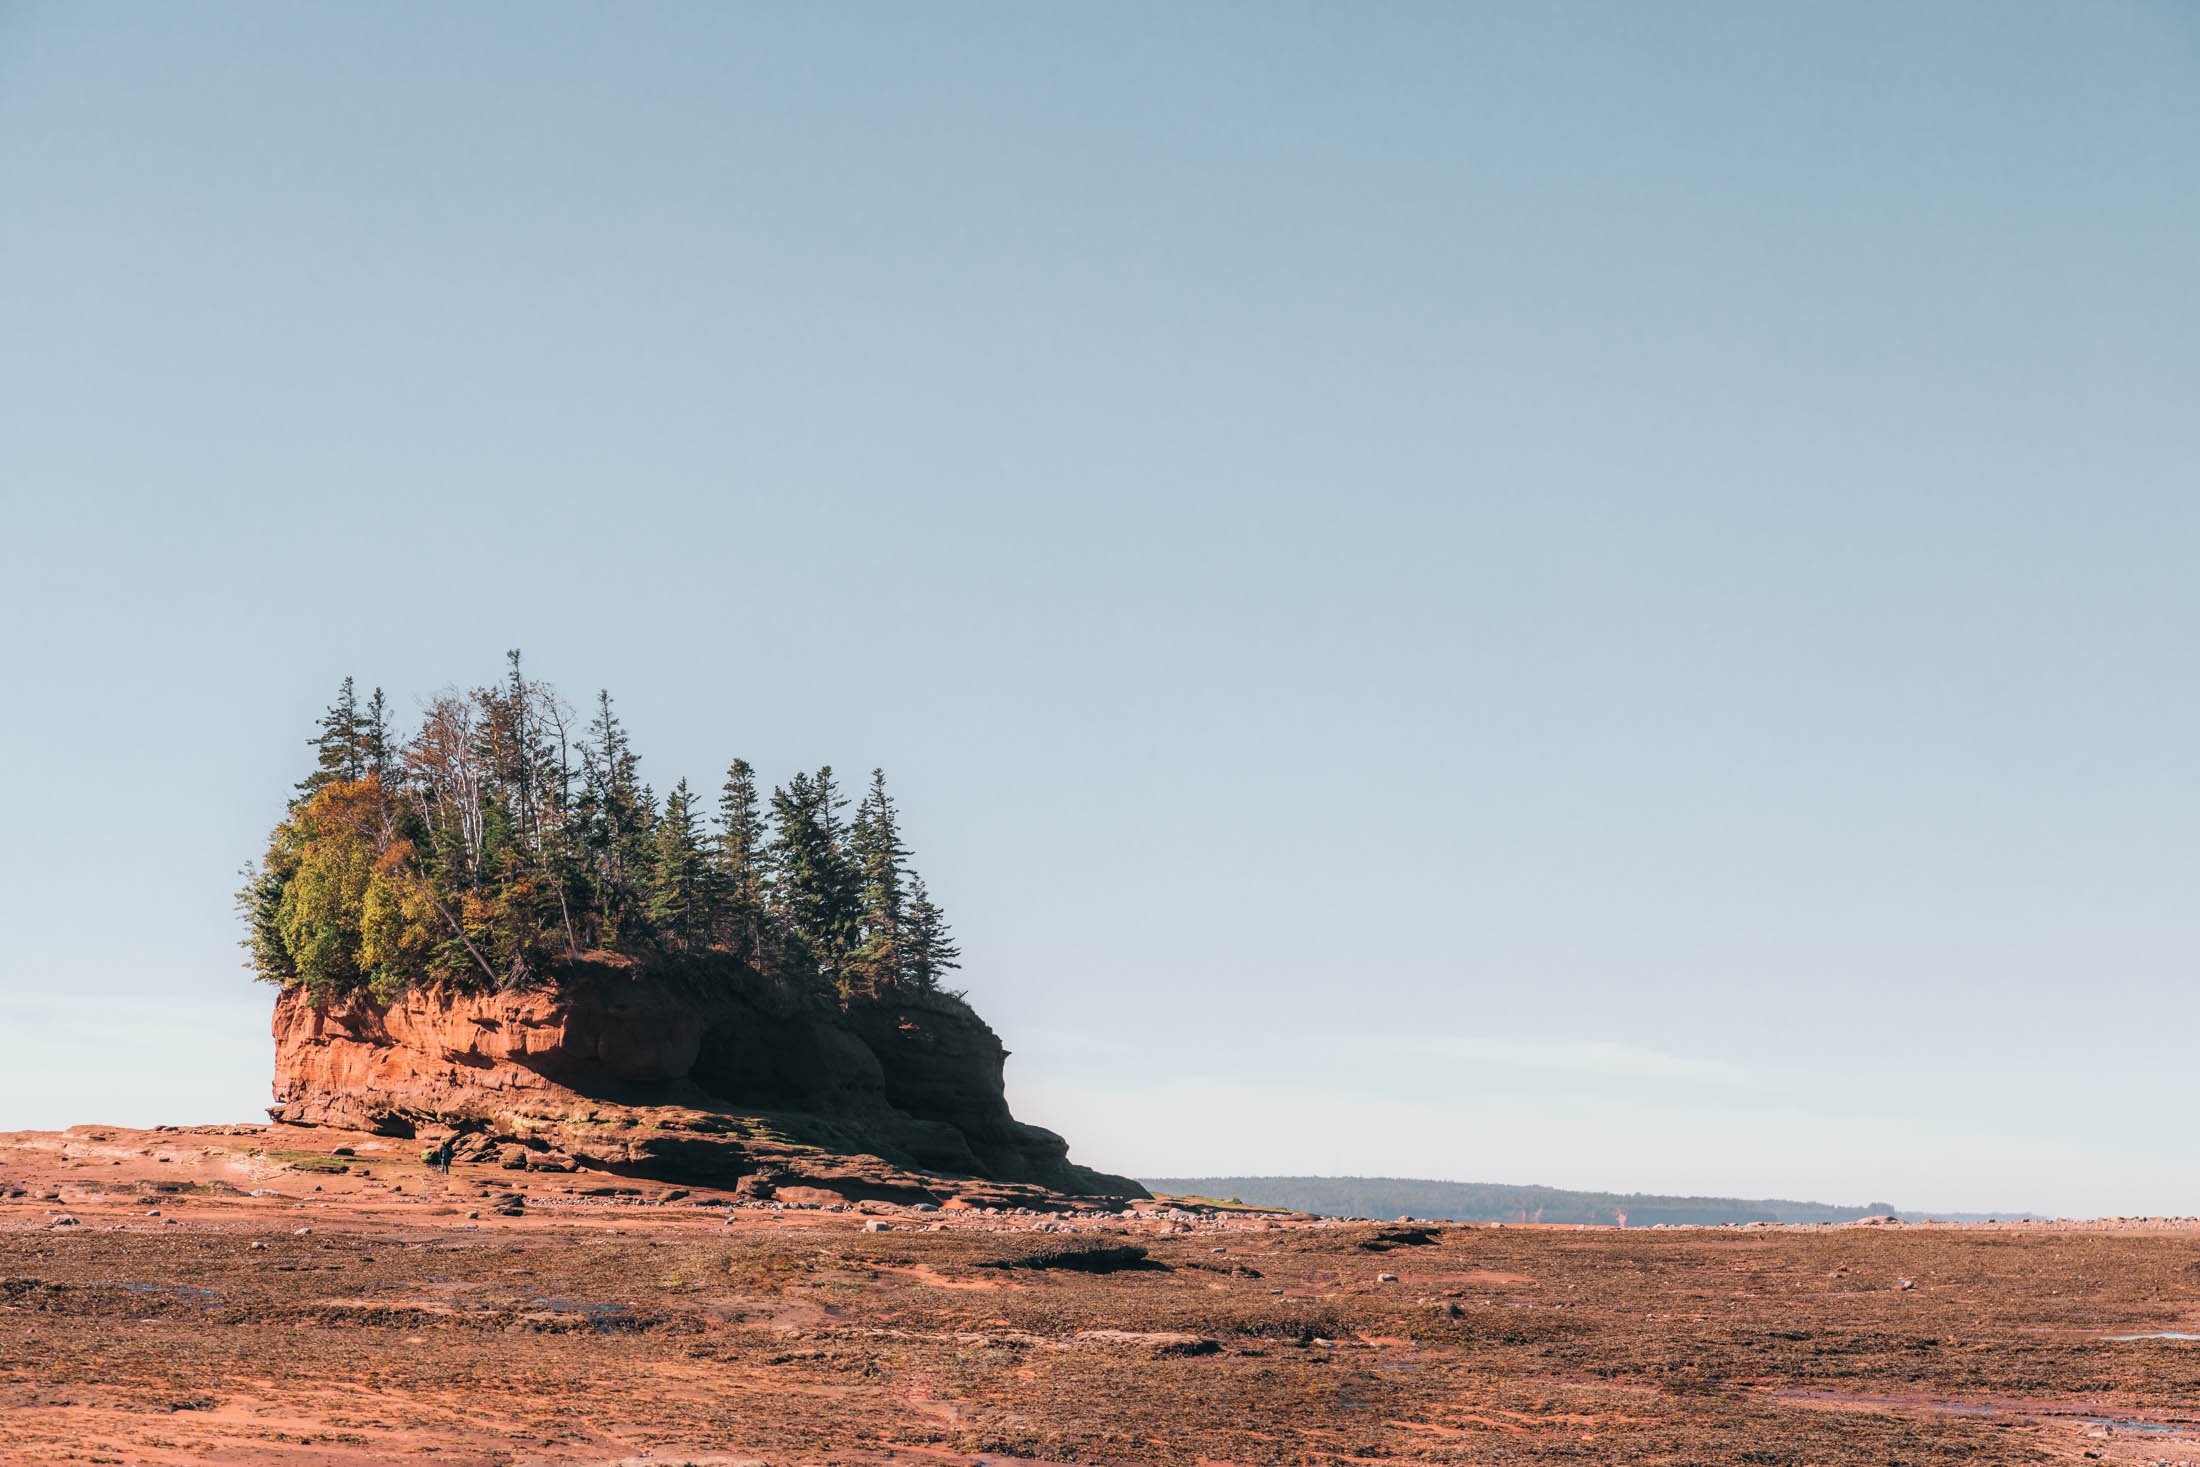 High tides, high adrenaline: the Bay of Fundy